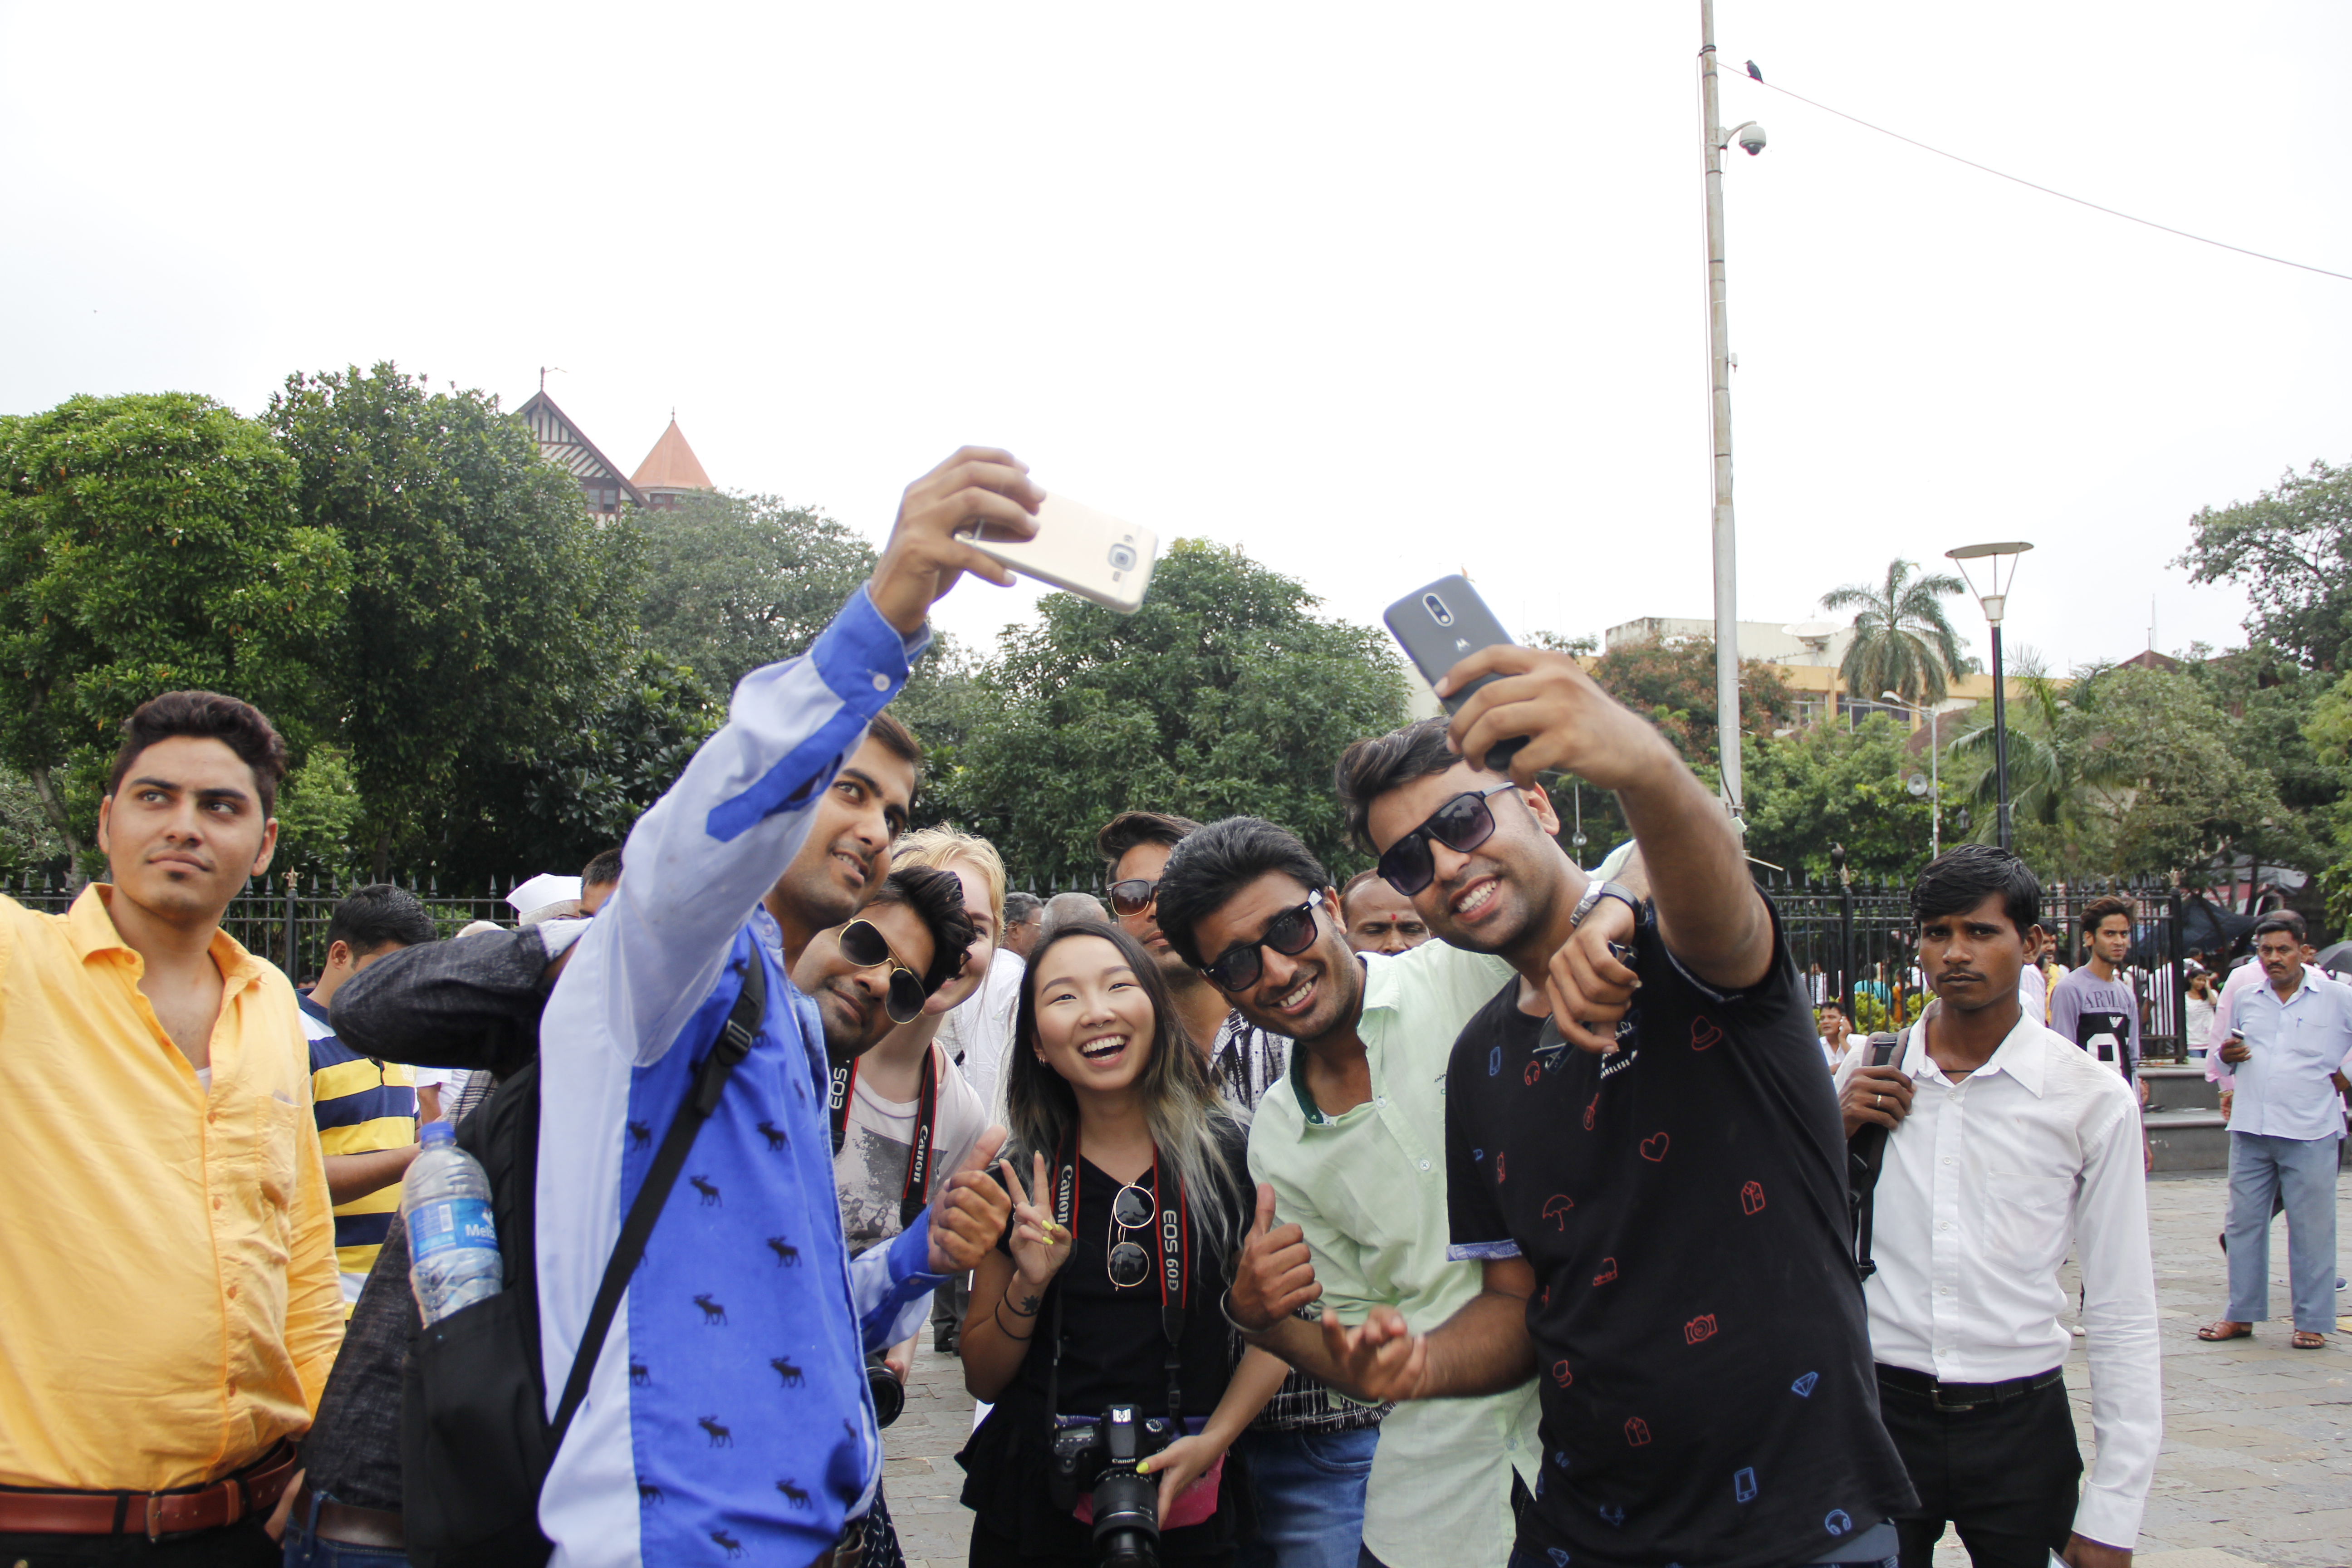 First impressions of Mumbai: When the tourists become the tourist attraction